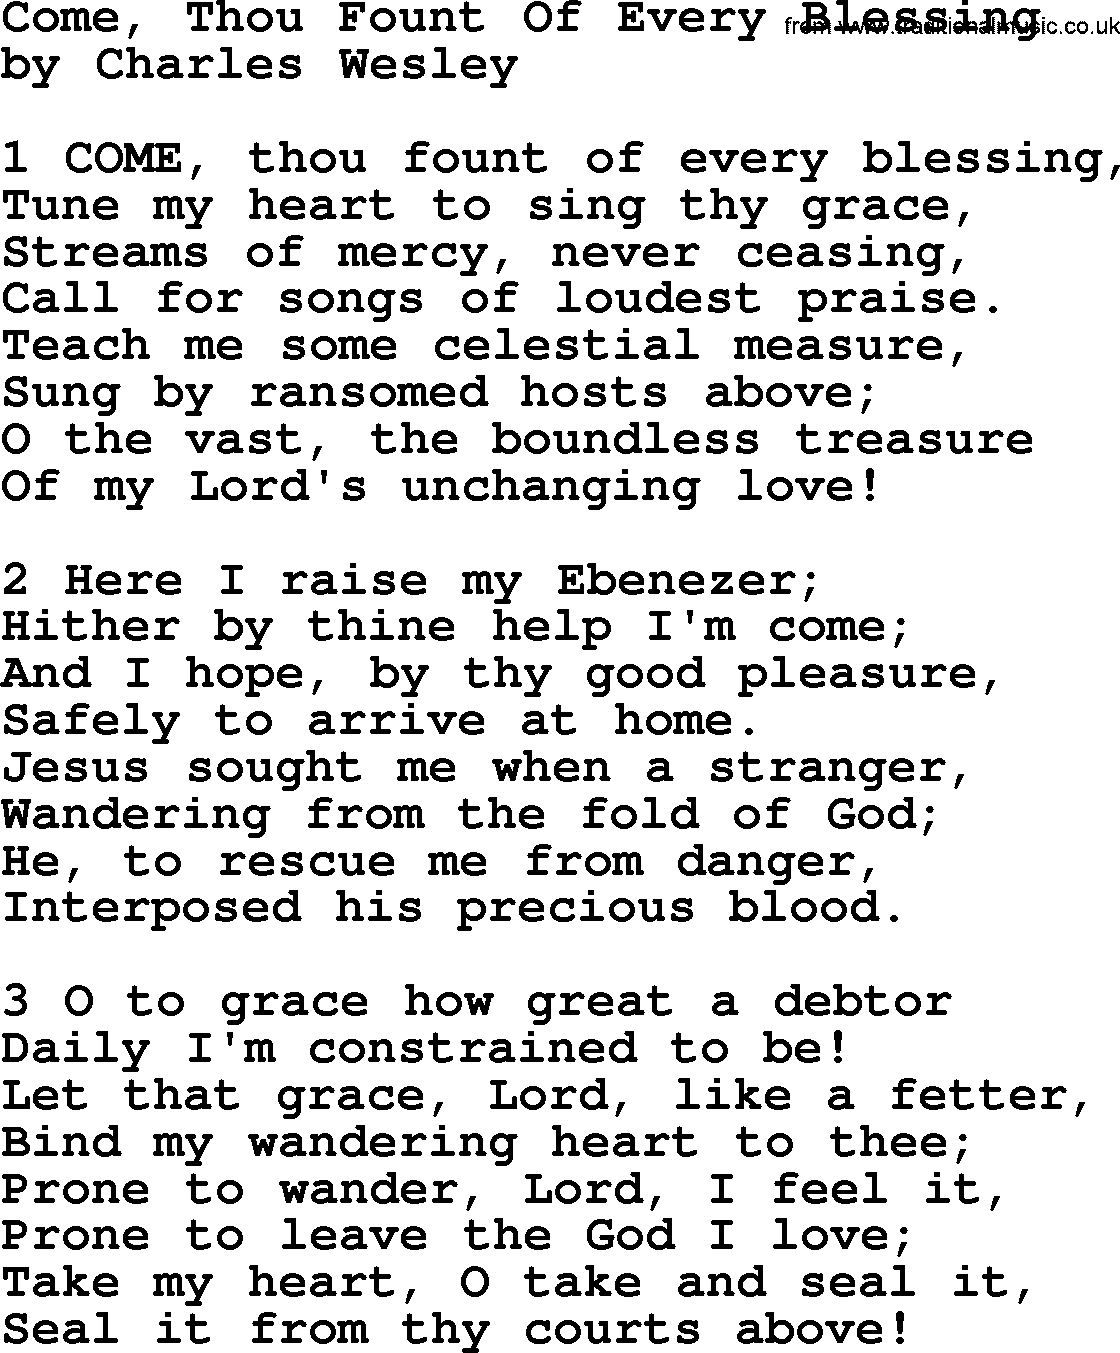 Come, Thou Fount Of Every Blessing by Charles Wesley - hymn lyrics